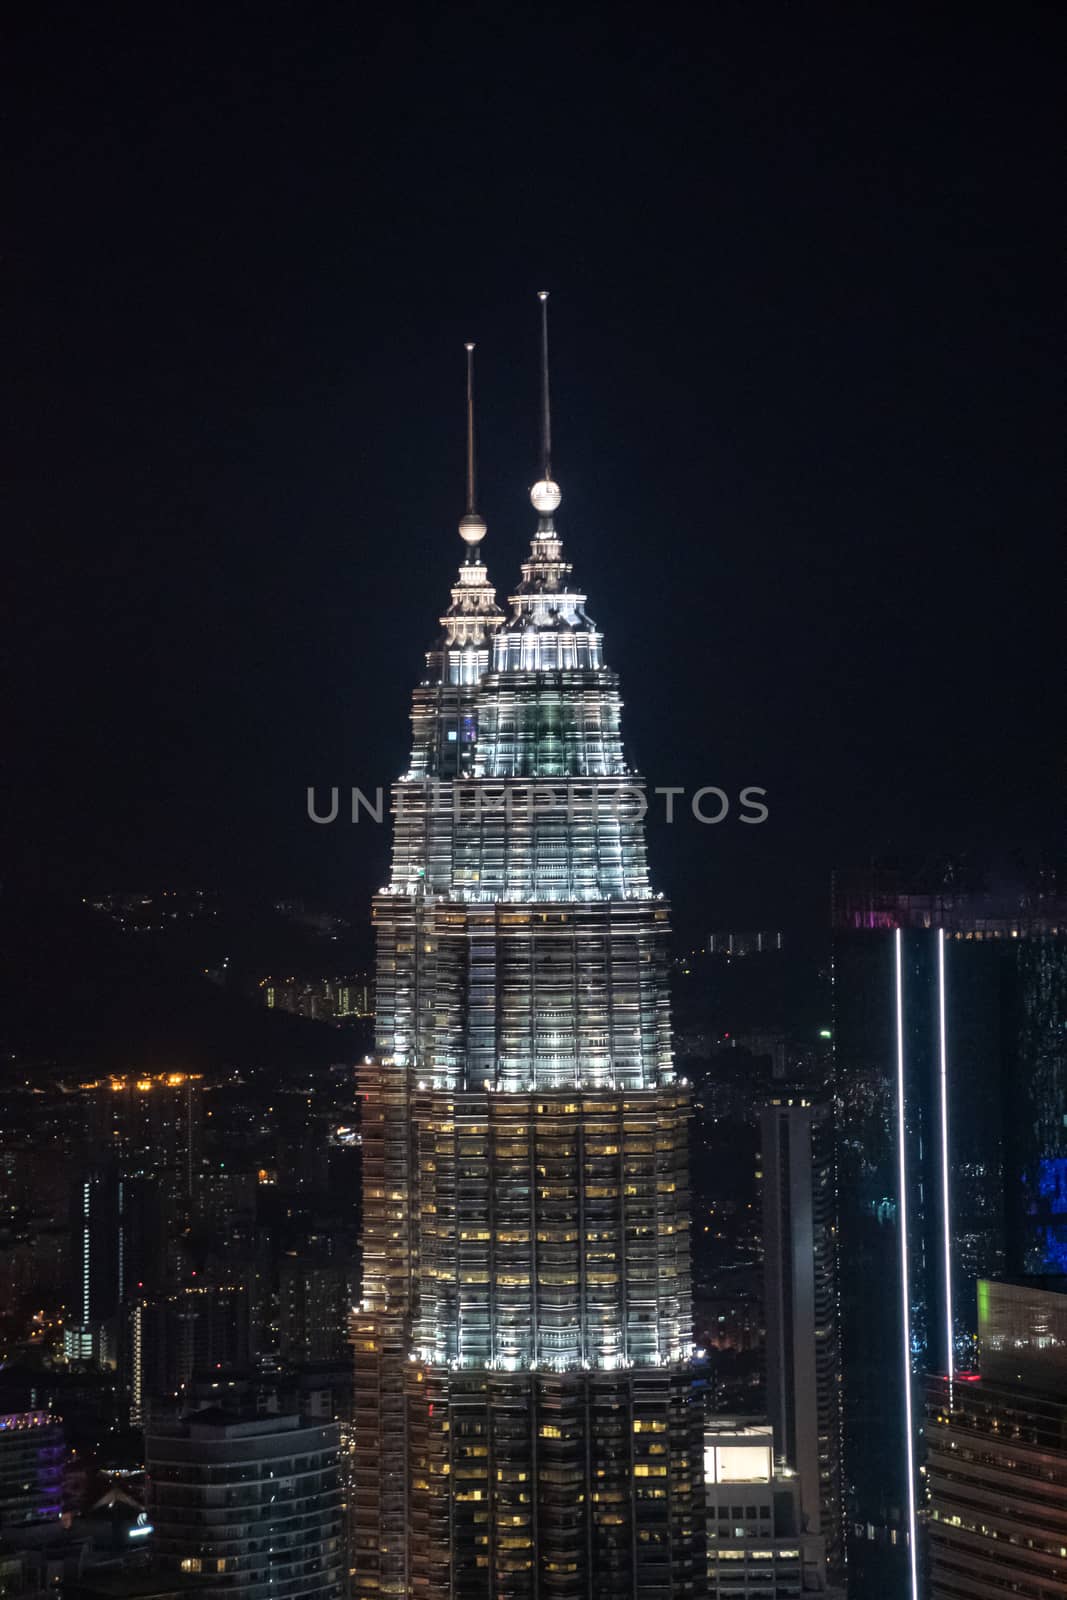 Twin towers in Kuala Lumpur during nigh over viewing illuminated highrise building